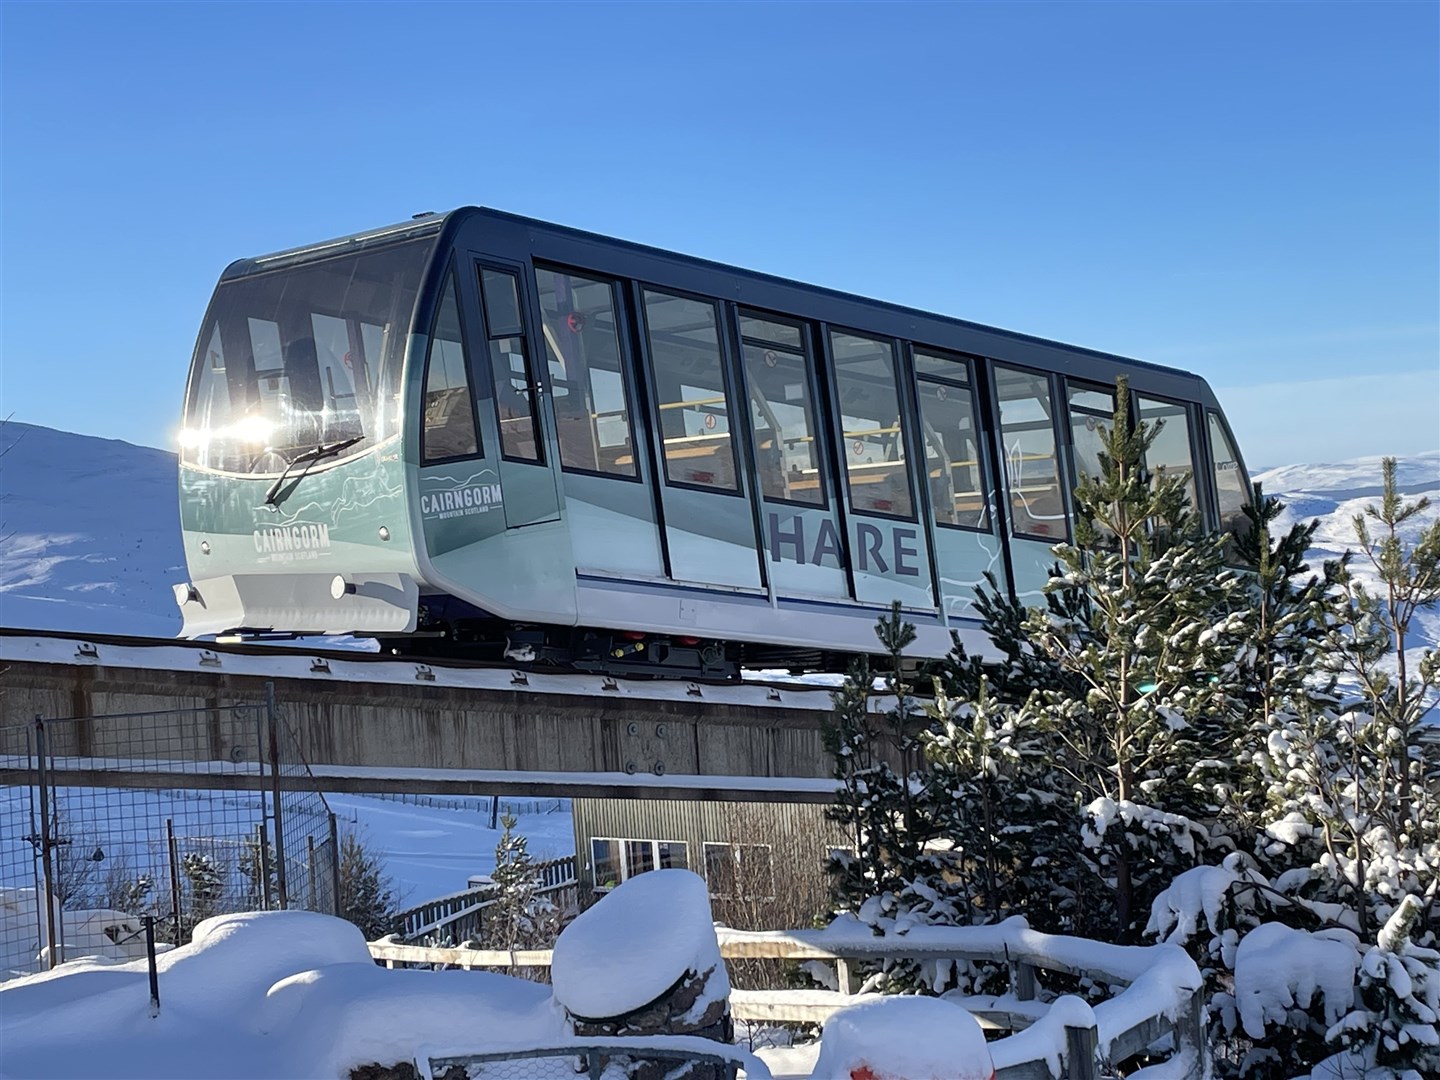 The Cairngorm funicular in its new livery on the track on Friday.